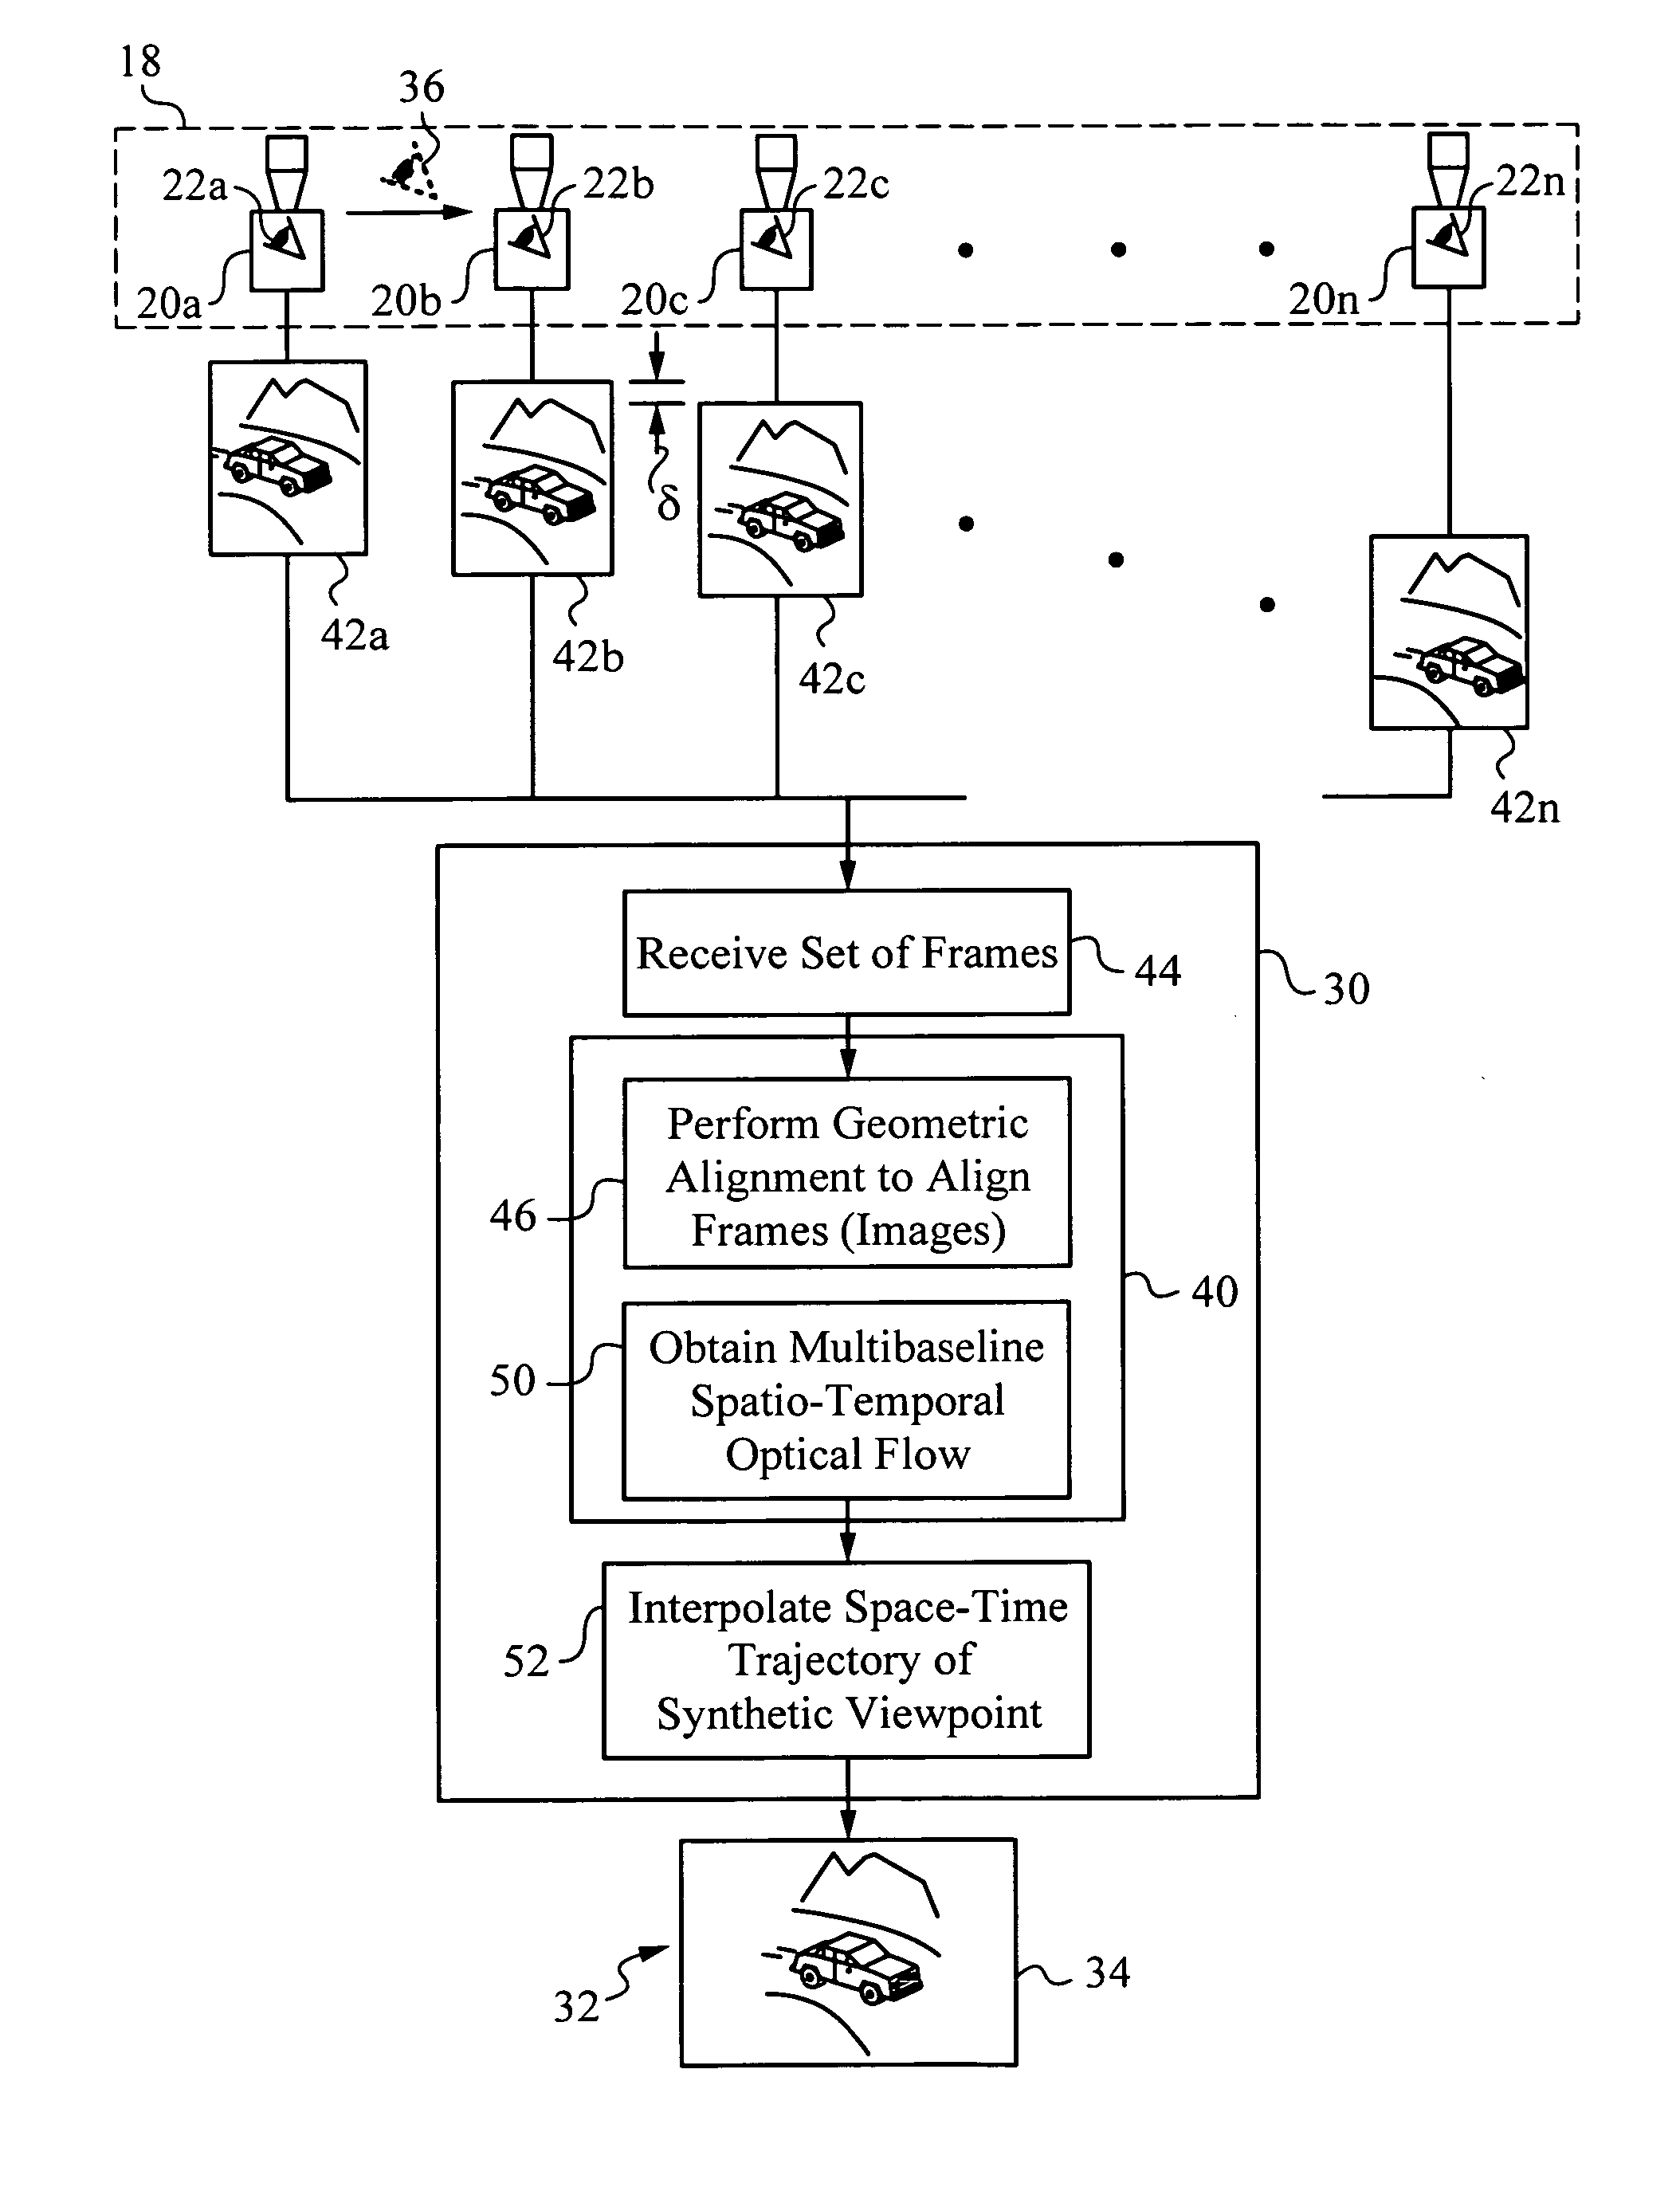 Apparatus and method for capturing a scene using staggered triggering of dense camera arrays